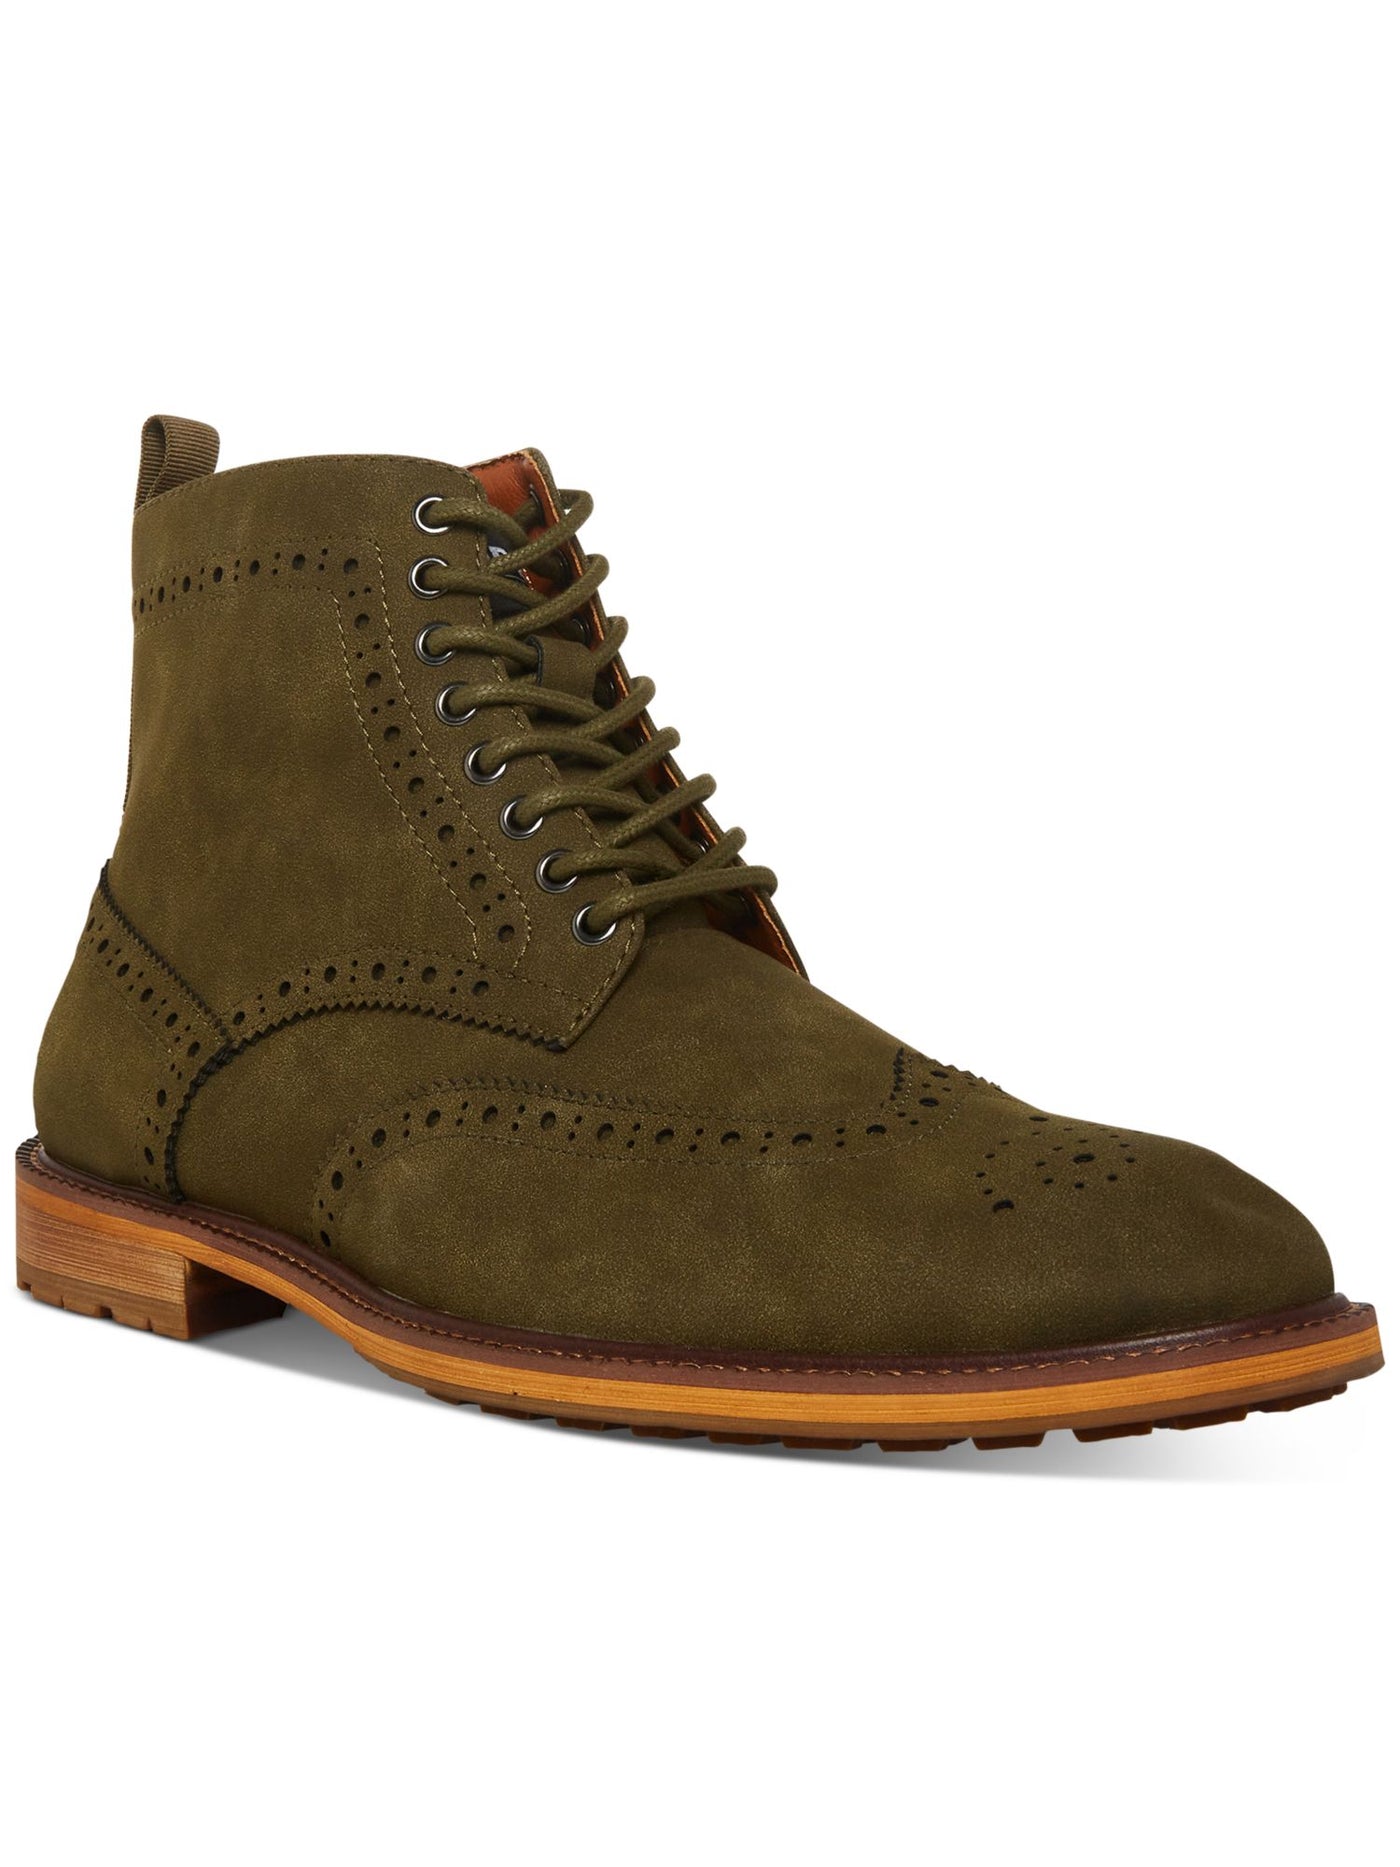 MADDEN Mens Olive Green Brogue Detailing Lace-Up Front Heel Pull-Tab Padded Remppr Wingtip Toe Block Heel Zip-Up Boots Shoes 11